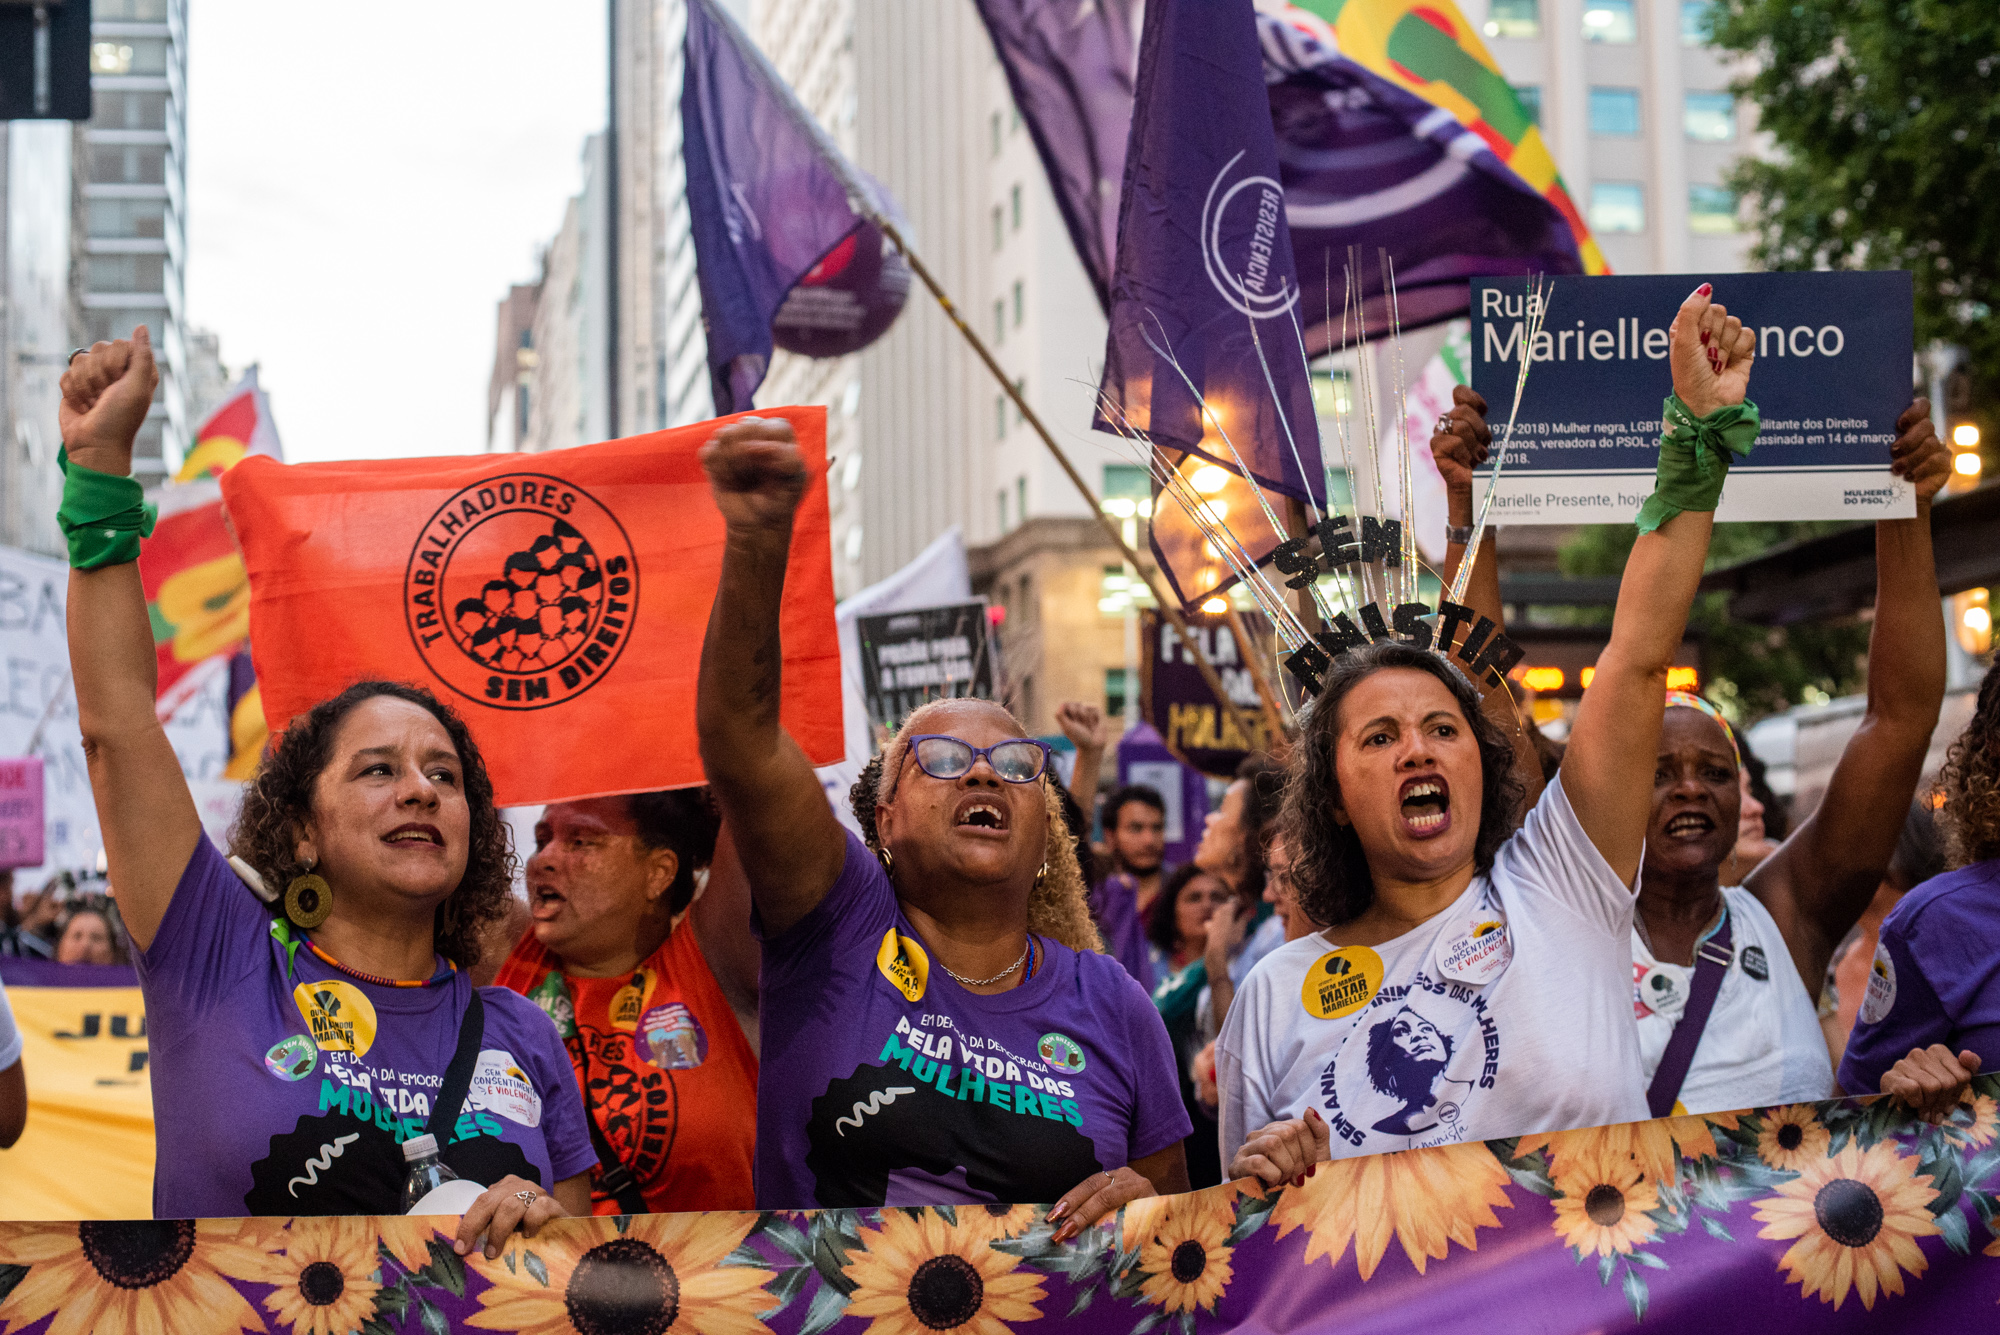 Women at the beginning of the 8M act hold a banner and shout slogans. In the photo, from left to right: Councilor Luciana Boiteux, Councilor Monica Cunha, Tatianny Araújo; in the back, holding the flag of the Workers Without Rights Movement: Maria dos Camelôs and, holding Marielle Franco’s plaque, Sílvia Mendonça. Photo: Bárbara Dias